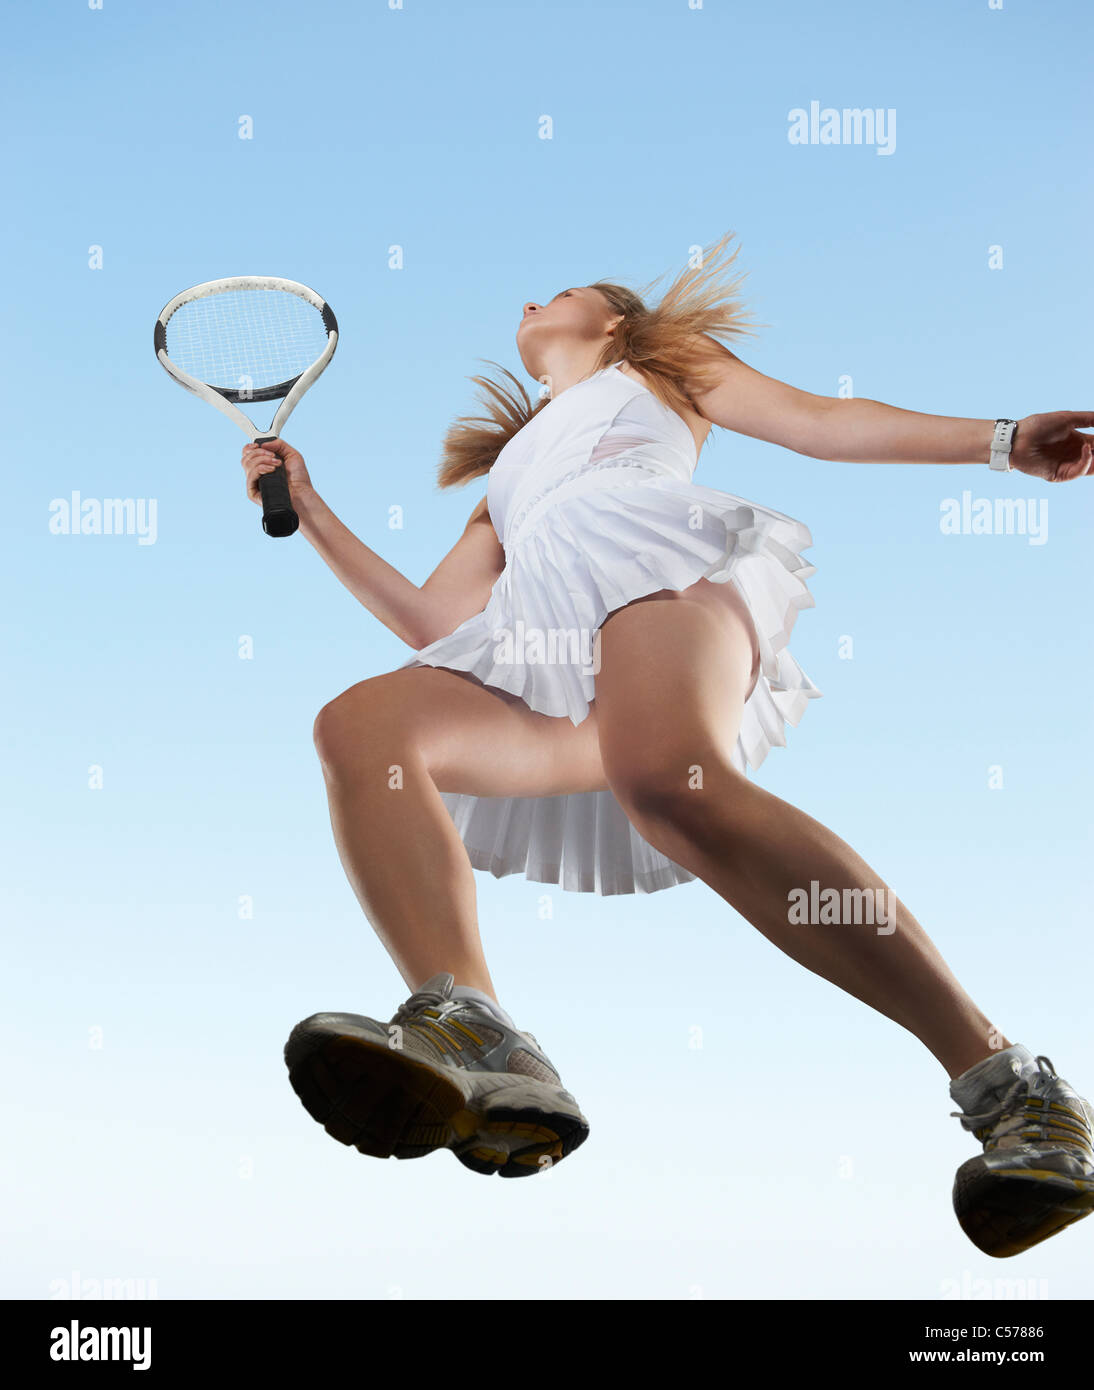 Low angle view of woman playing tennis Stock Photo